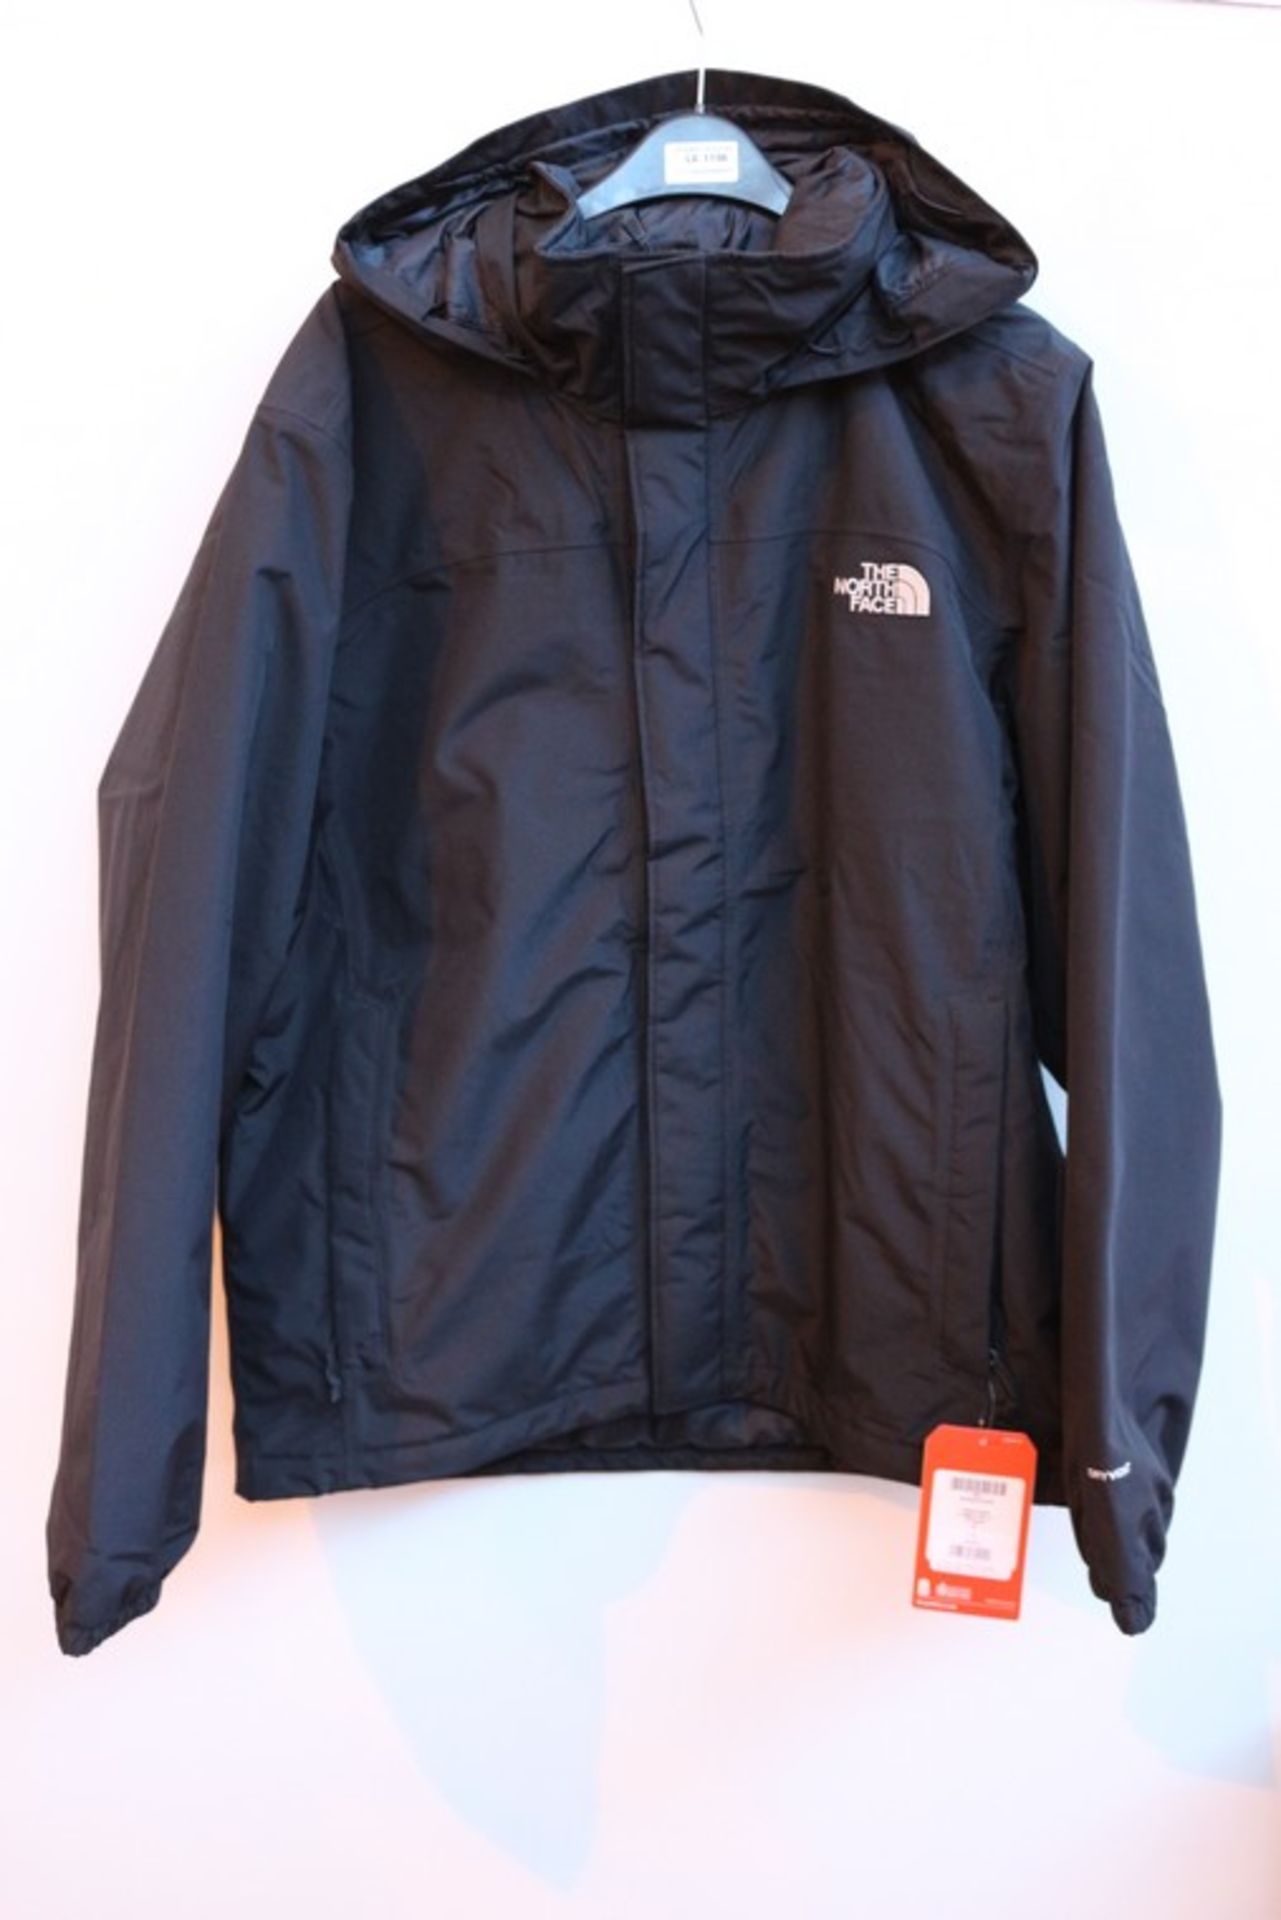 1 x SIZE M GENTS DESIGNER NORTH FACE JACKET IN BLACK (6.1.17) *PLEASE NOTE THAT THE BID PRICE IS